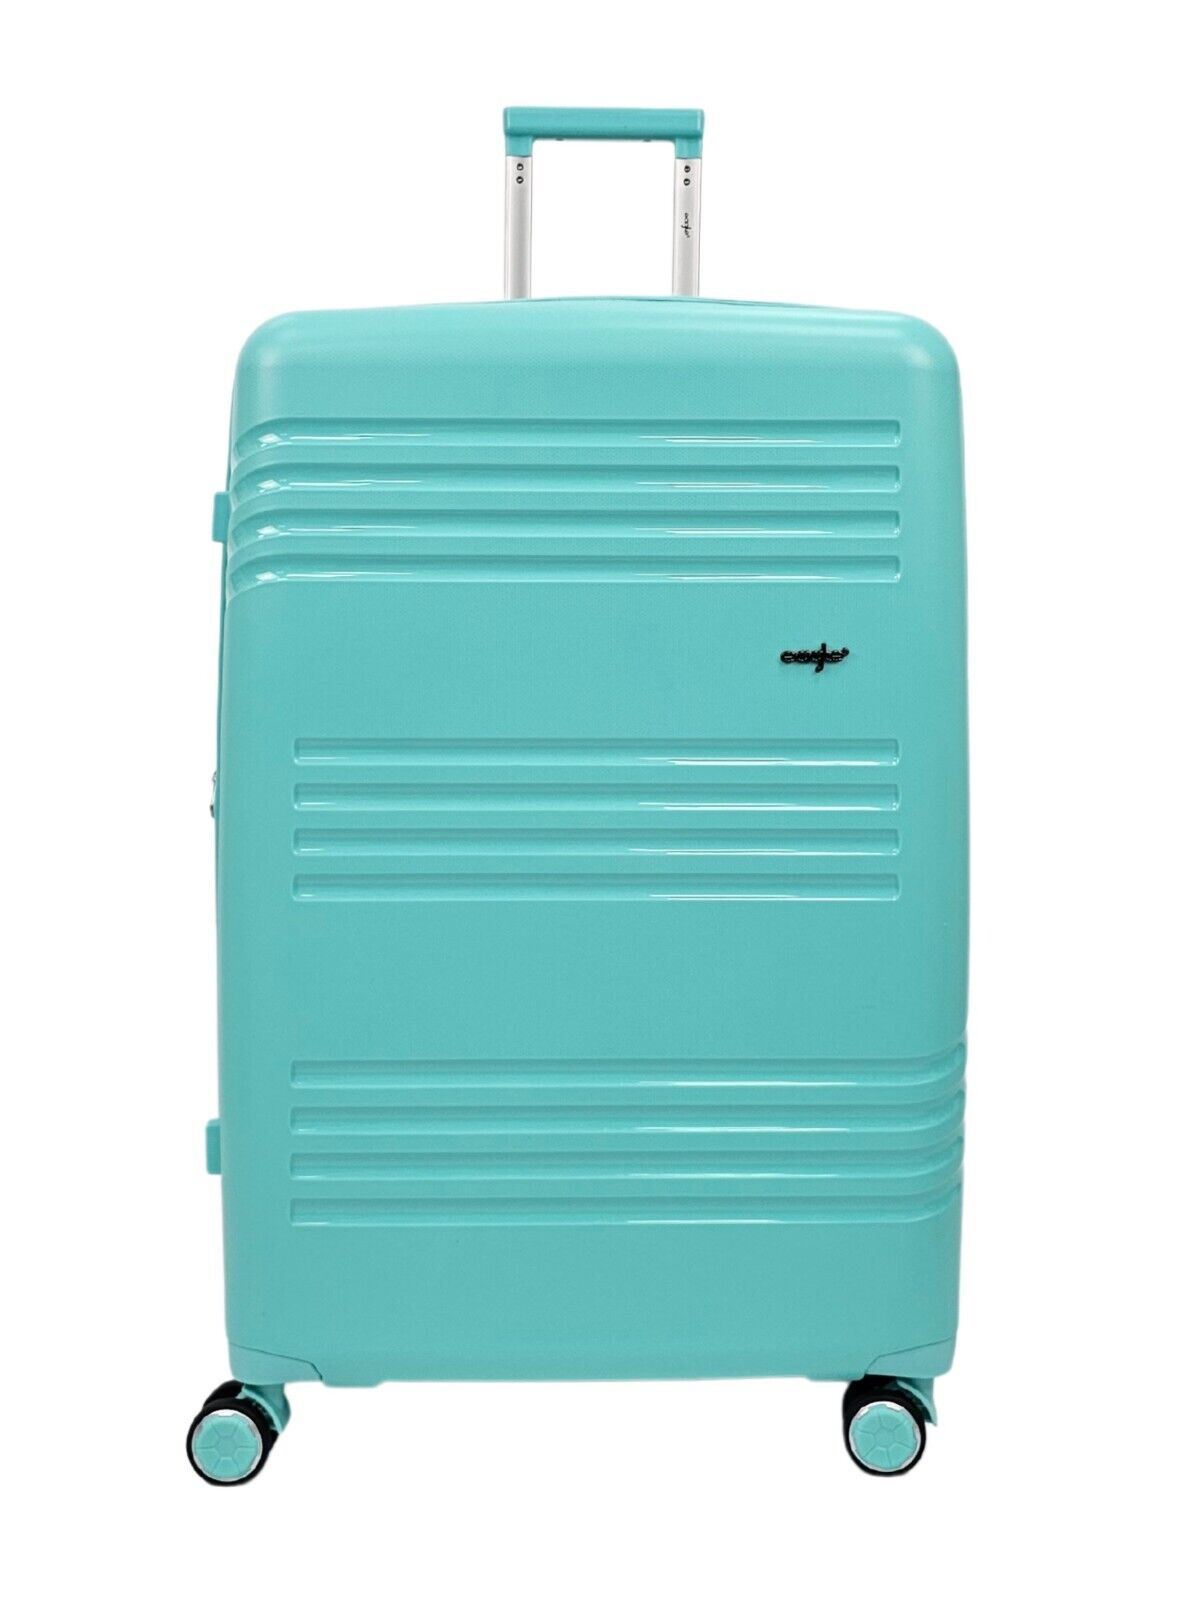 Brookwood Large Hard Shell Suitcase in Teal